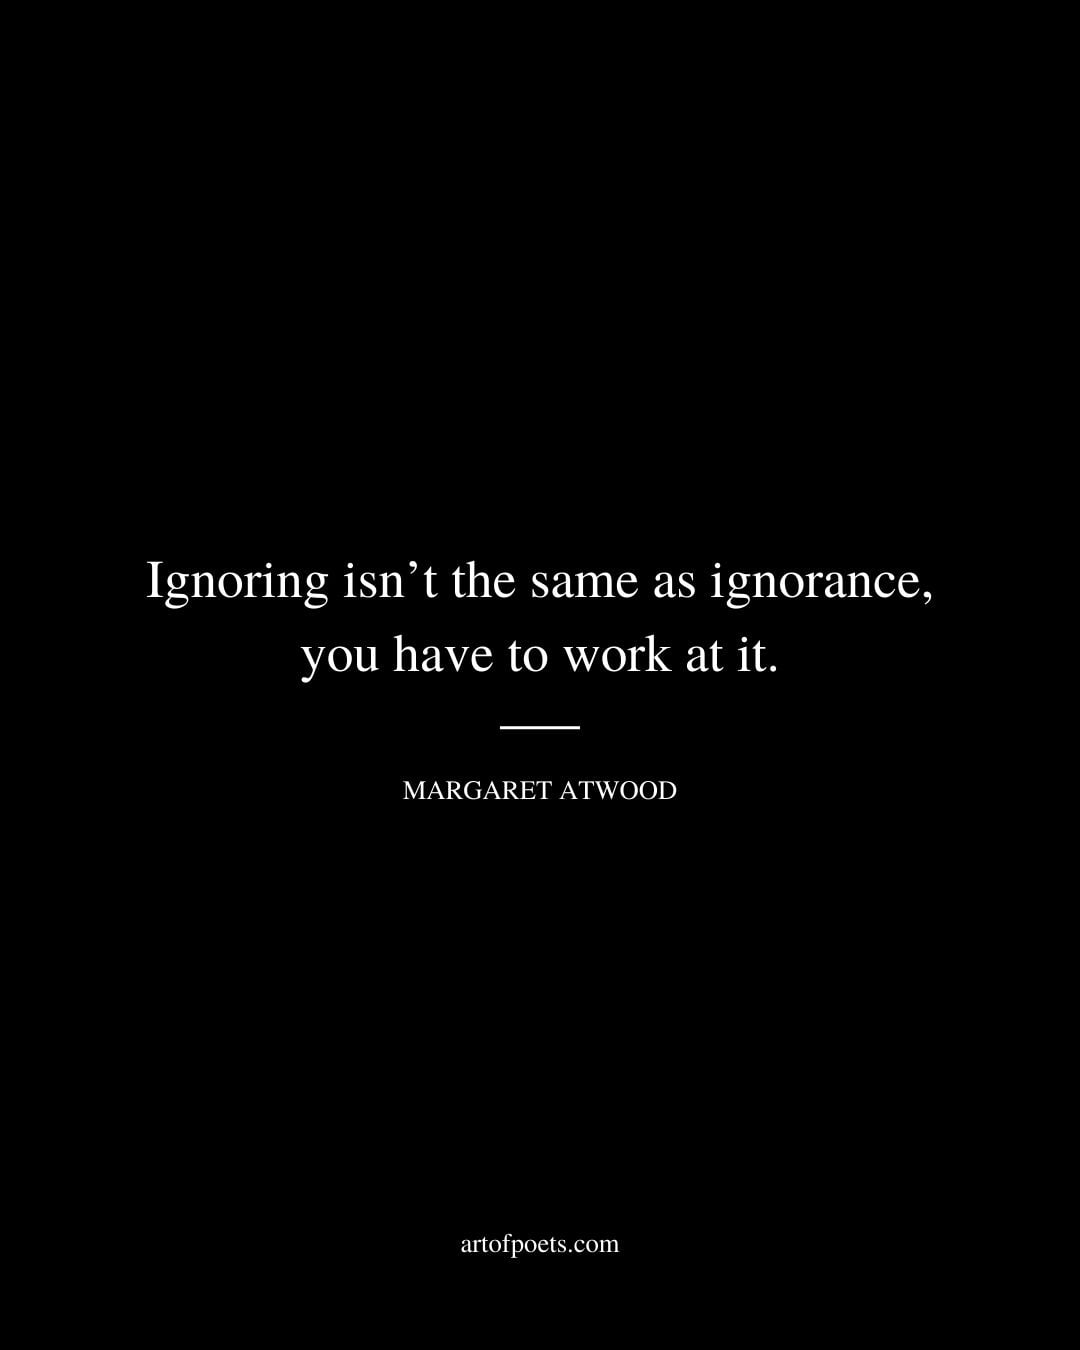 Ignoring isnt the same as ignorance you have to work at it. Margaret Atwood